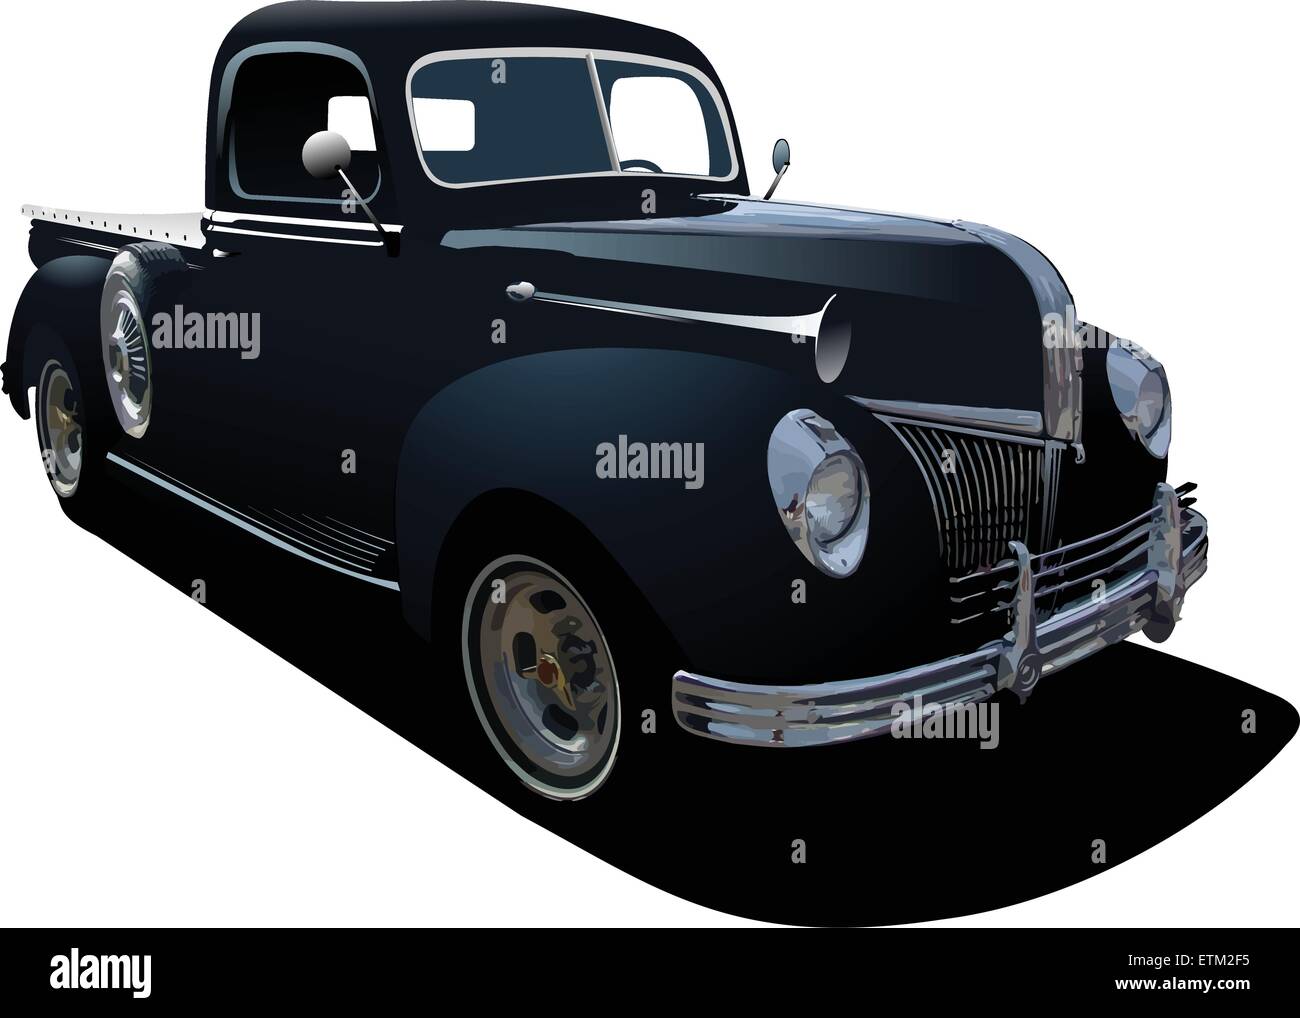 Black pickup truck with badges removed Stock Vector